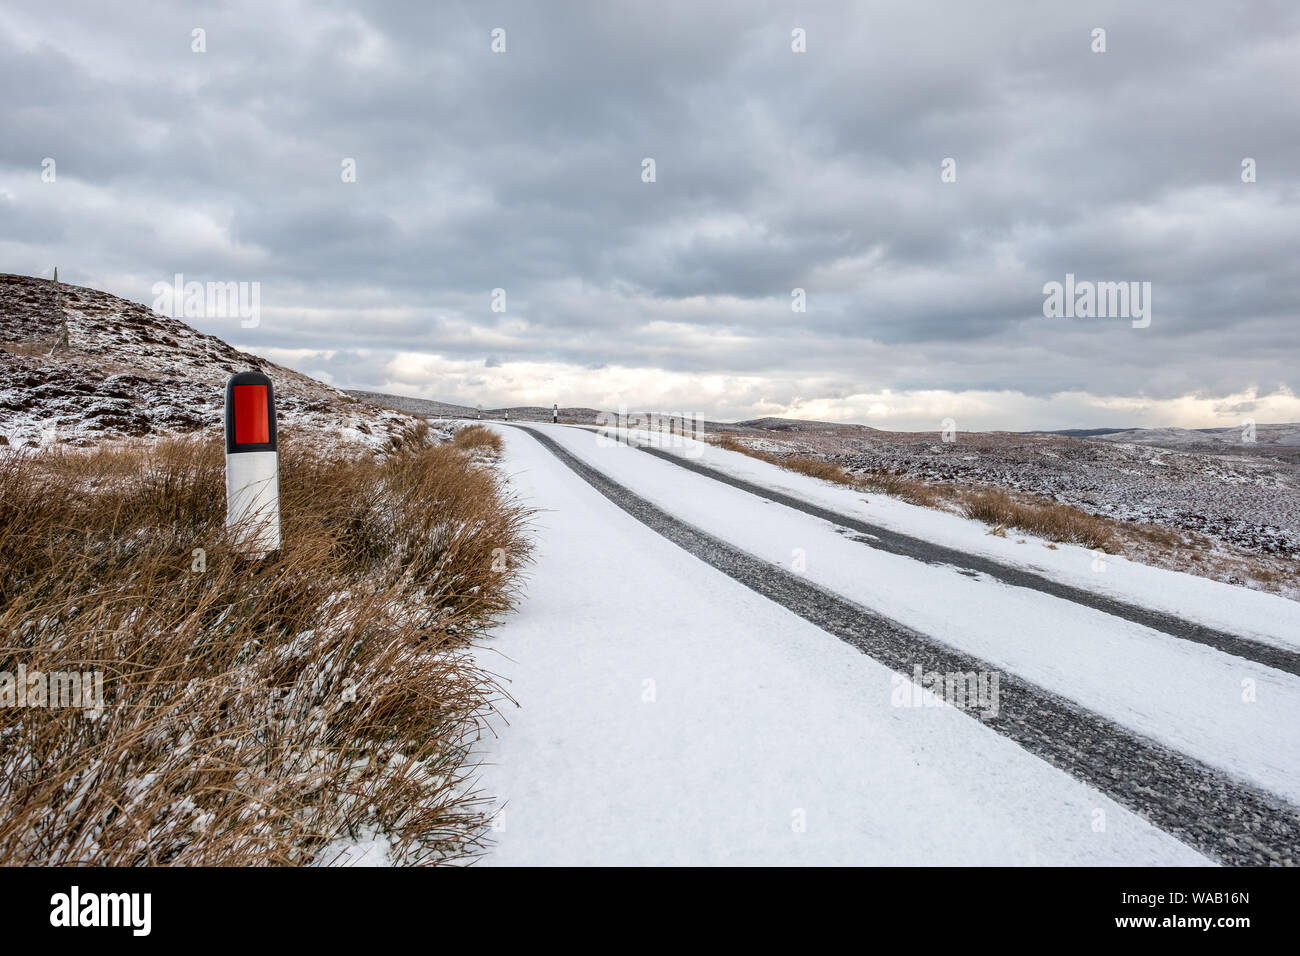 Clear tyre tracks on a snowy road in a rural setting with a stormy sky and room for copy Stock Photo